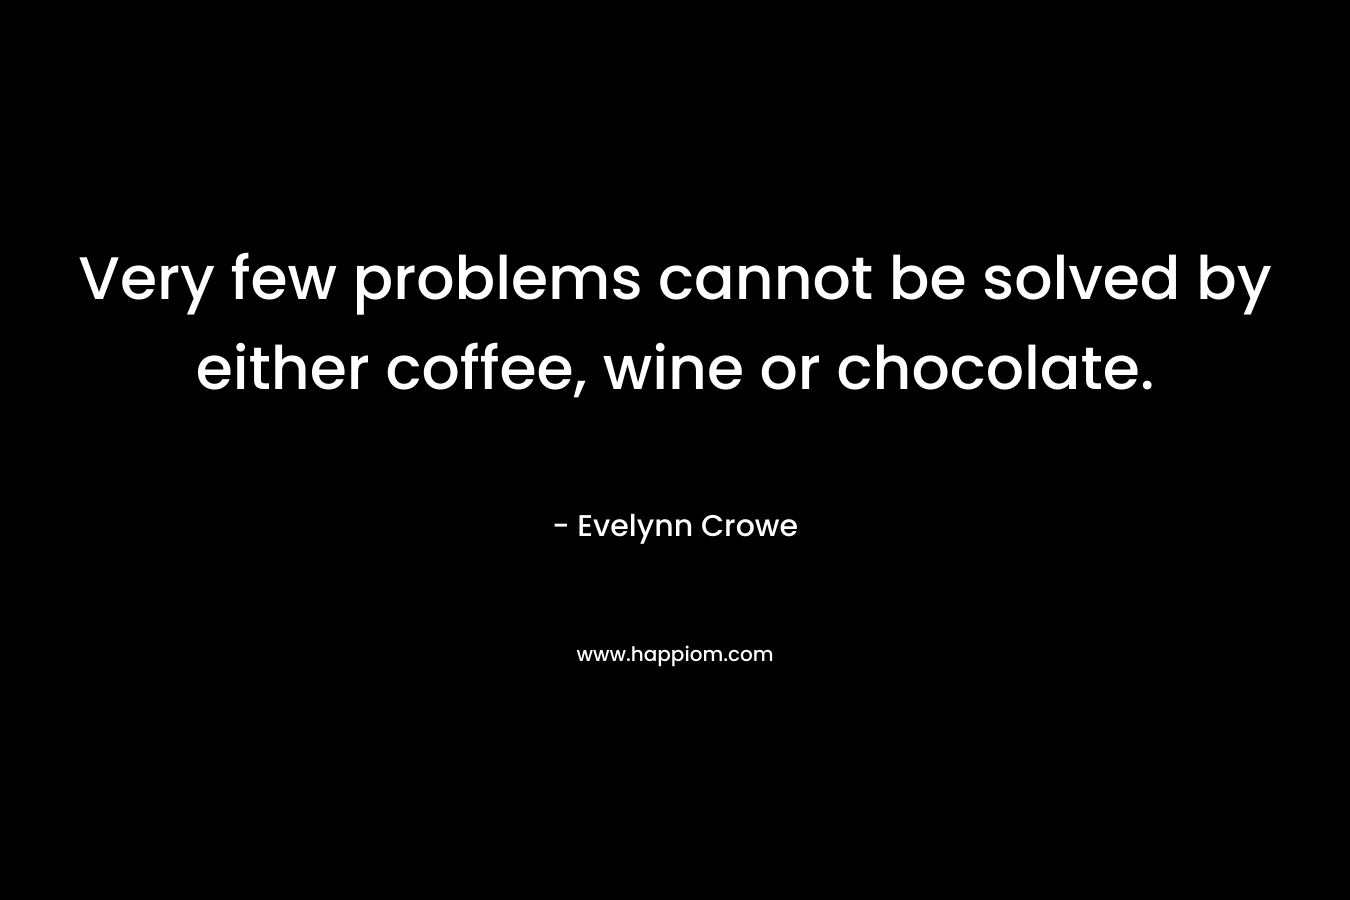 Very few problems cannot be solved by either coffee, wine or chocolate.